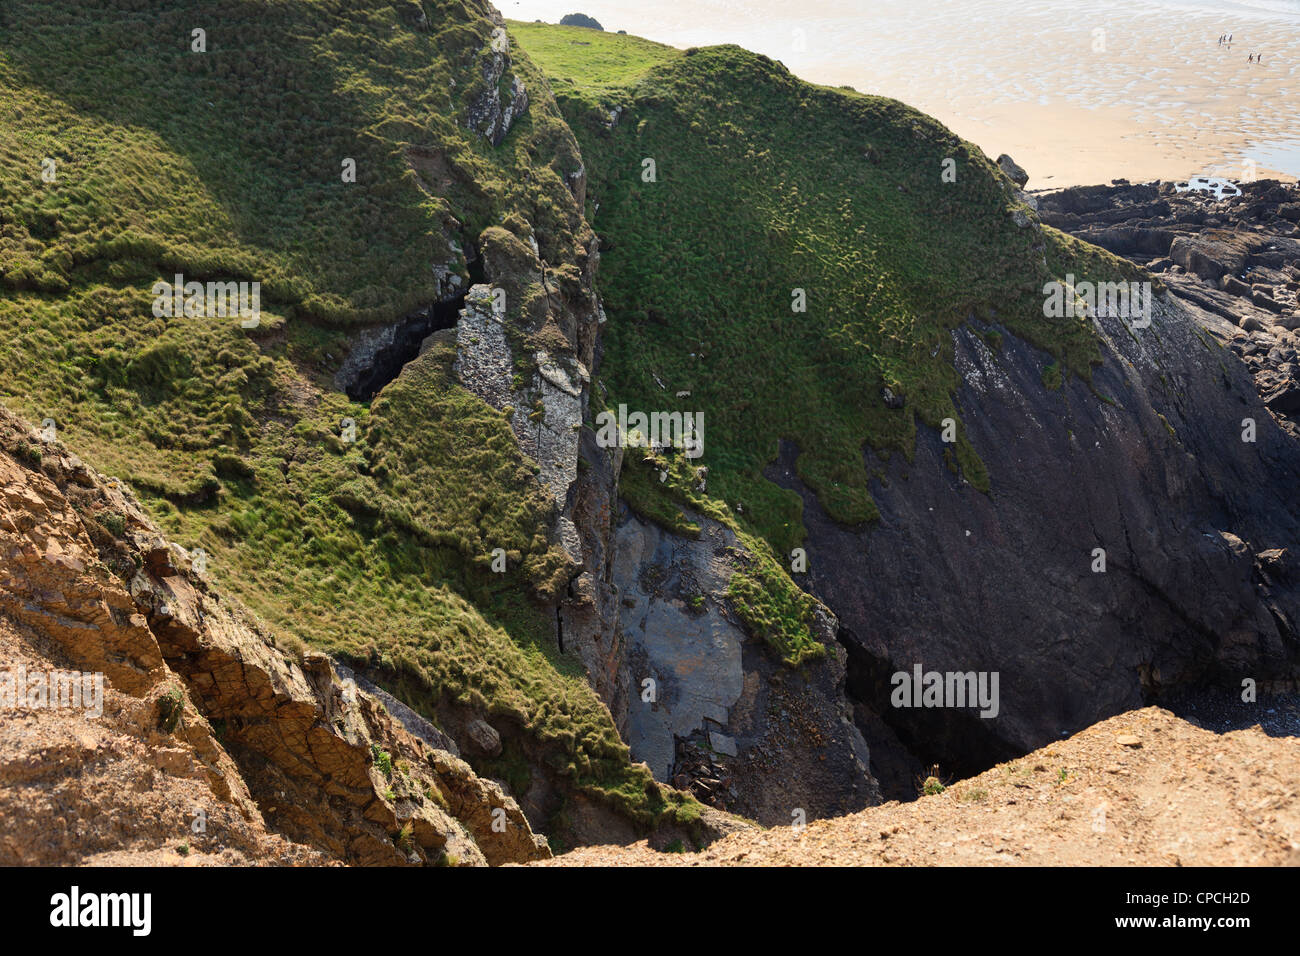 Rocks cracking and breaking away from the eroding cliffs above the beach at Bude, Cornwall, England, UK, Britain Stock Photo